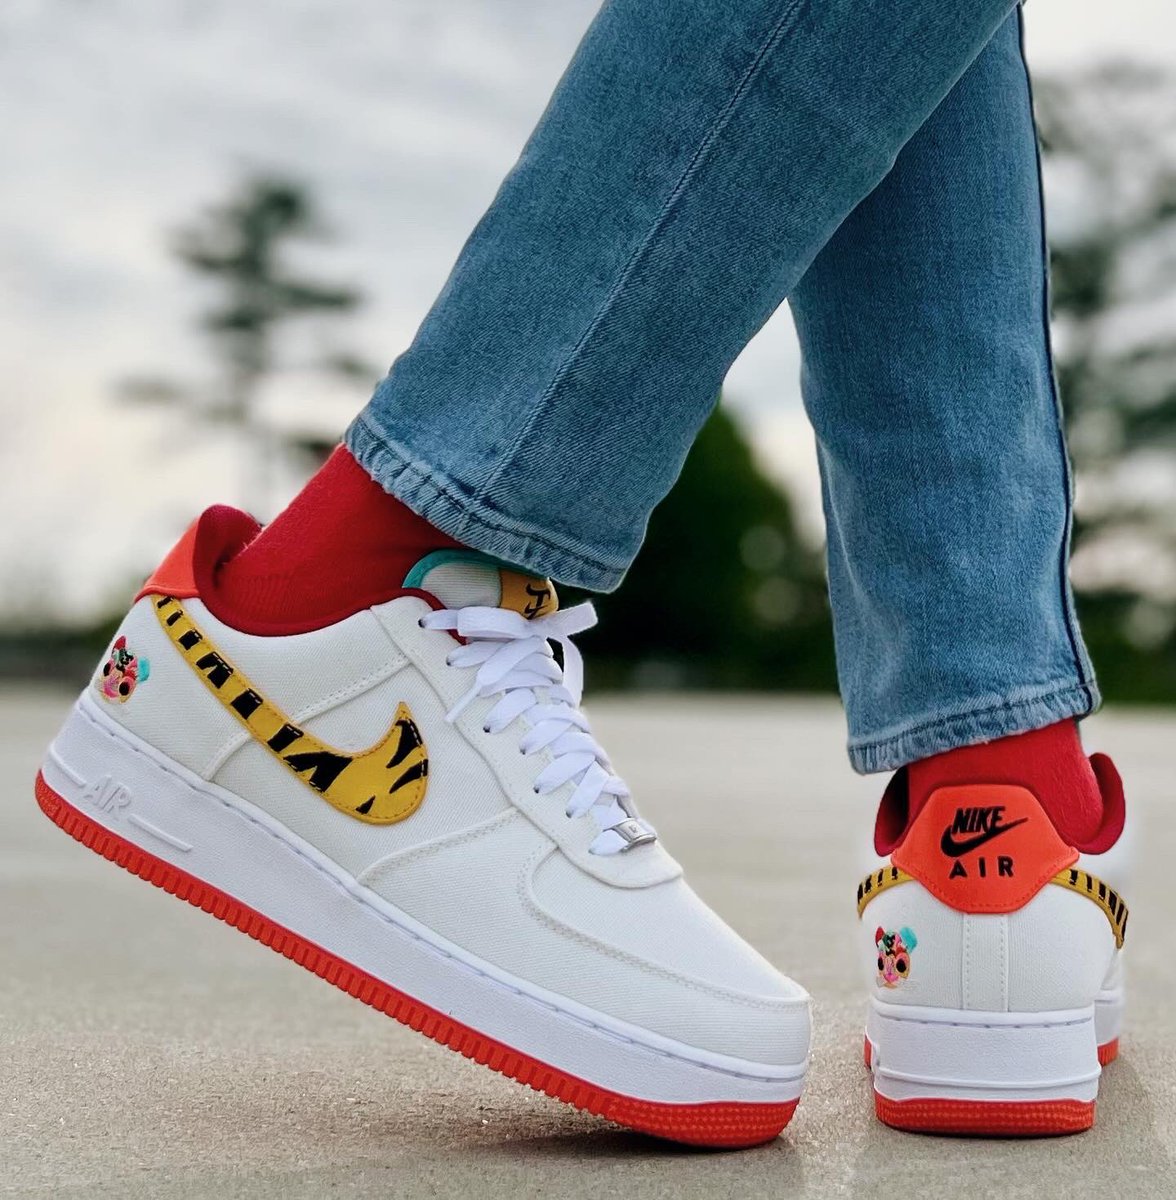 🫡🏆💯 What Up Doe, Happy Monday! #KOTD Nike Air Force 1 “Year of The Tiger” #JMillzChallenge #Since82 #SNKRSKickCheck #SNKRSLiveHeatingUp #YourSneakersAreDope